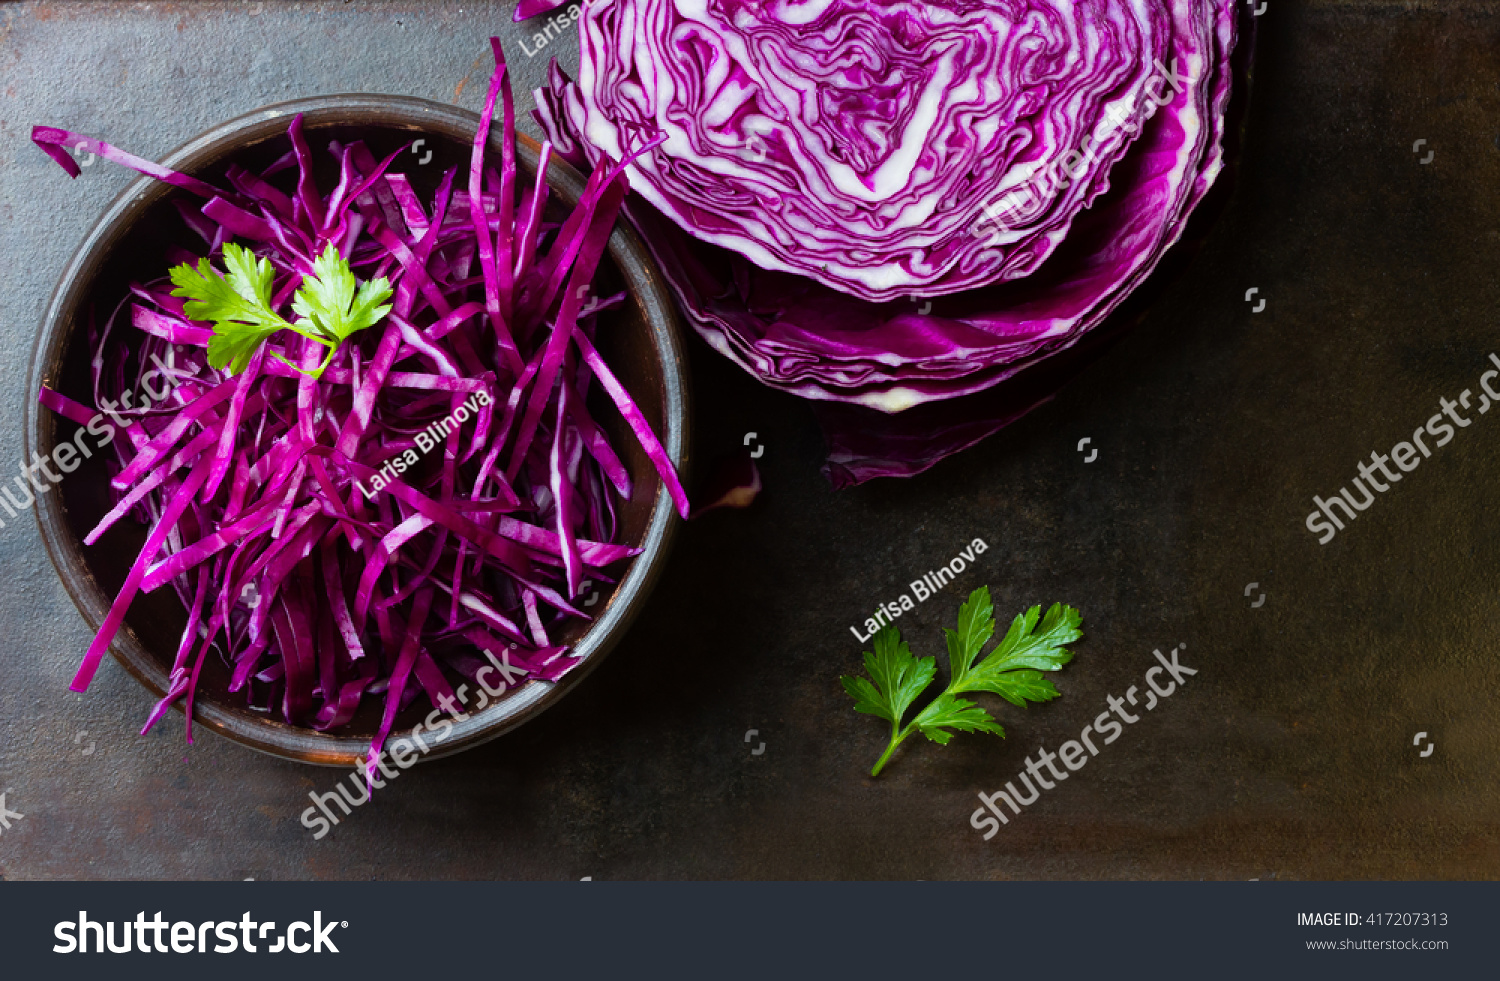 Shredded red cabbage in clay bowl on black background. Vegetarian healthy food. Top view #417207313